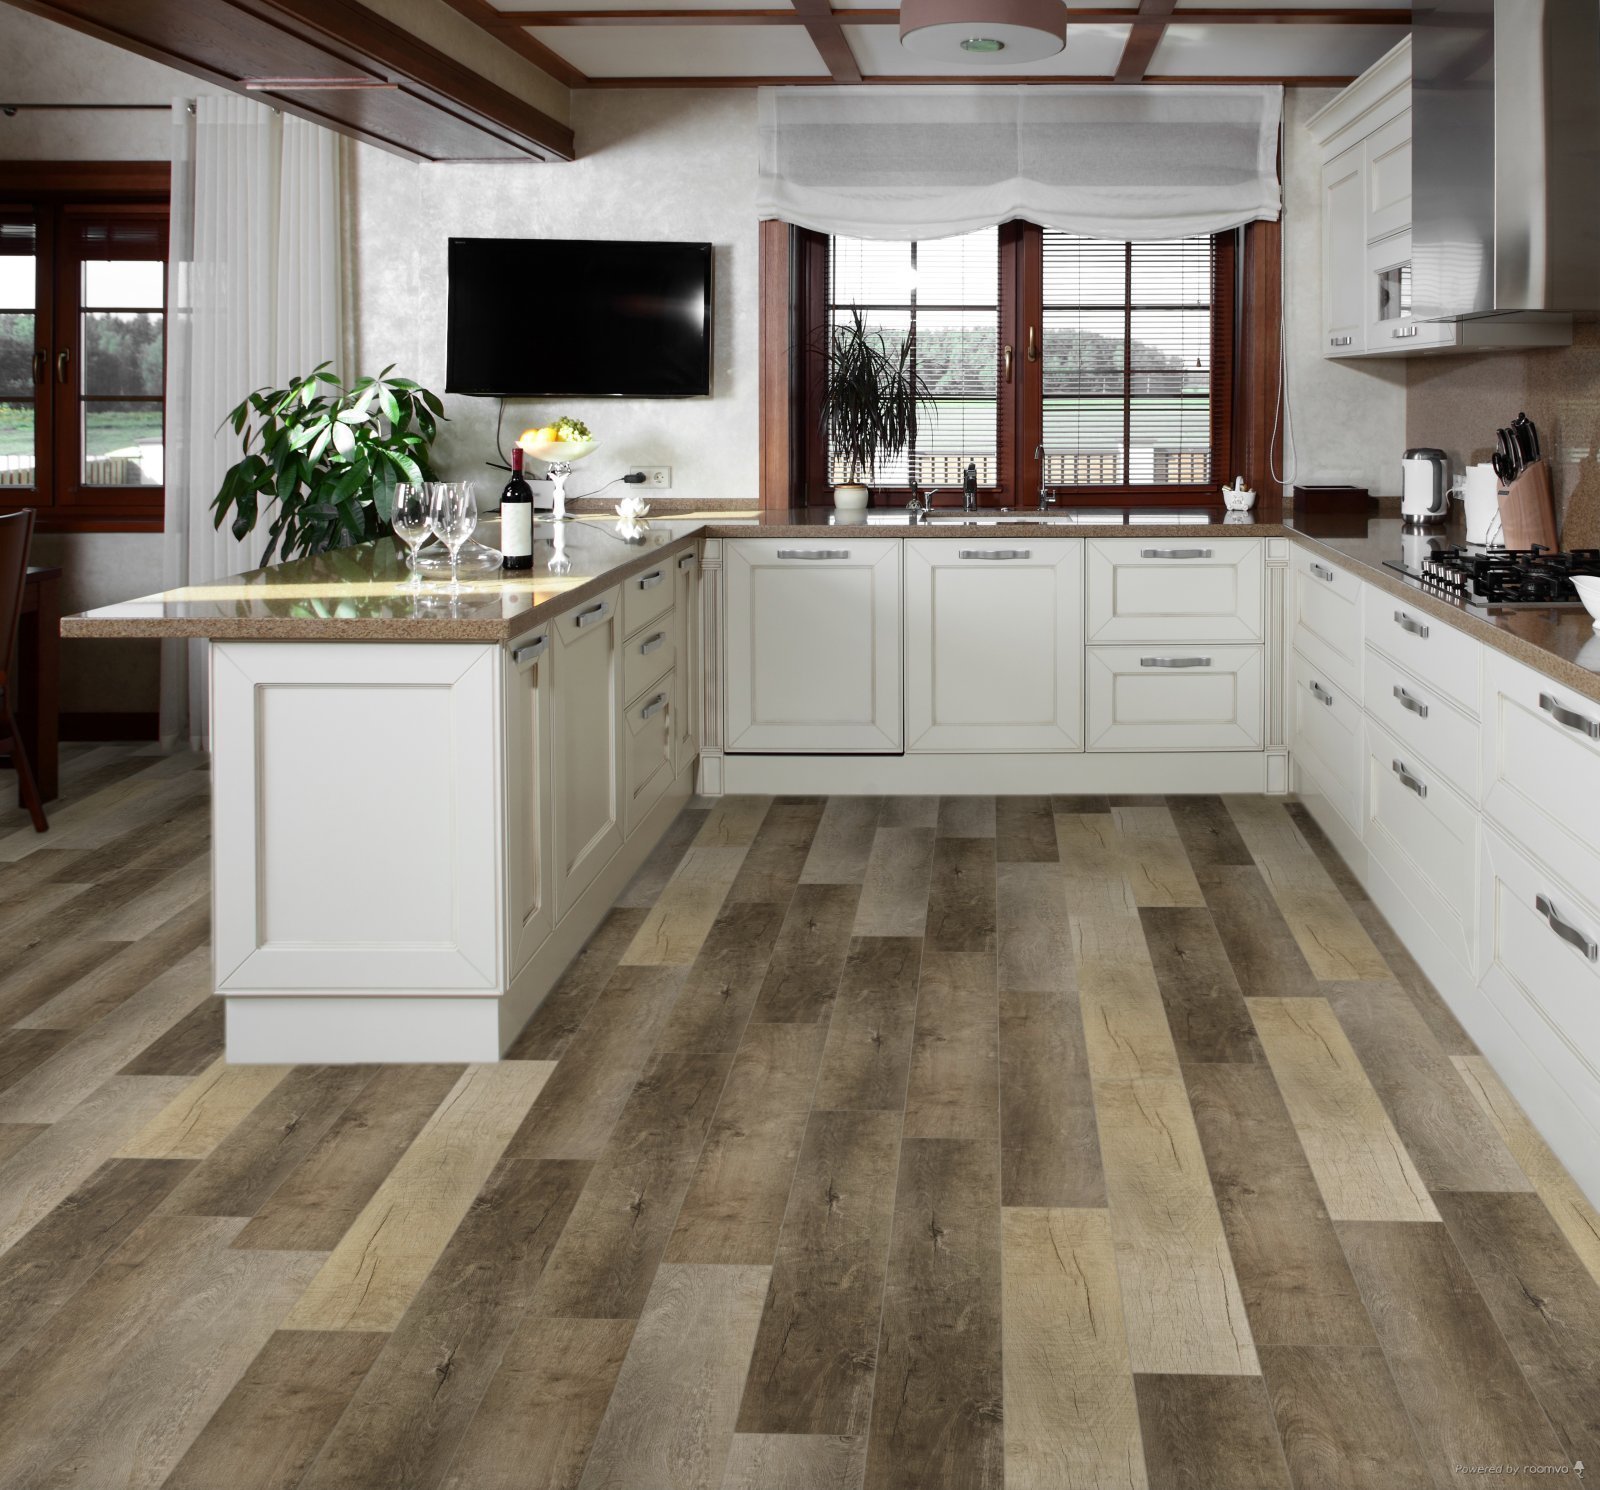 Horizen Flooring presents to you a picture of a quality wide plank Whiteville luxury vinyl plank. NovoCore Q Merengue collection features a wide range of colors & designs that will compliment any interior. Natural wood grain synchronized surface allow for an authentic hardwood look & feel. This collection features a 0.3″ / 7.5 mm overall thickness and a durable 22 mil / 0.55 mm wear layer for residential and commercial applications.